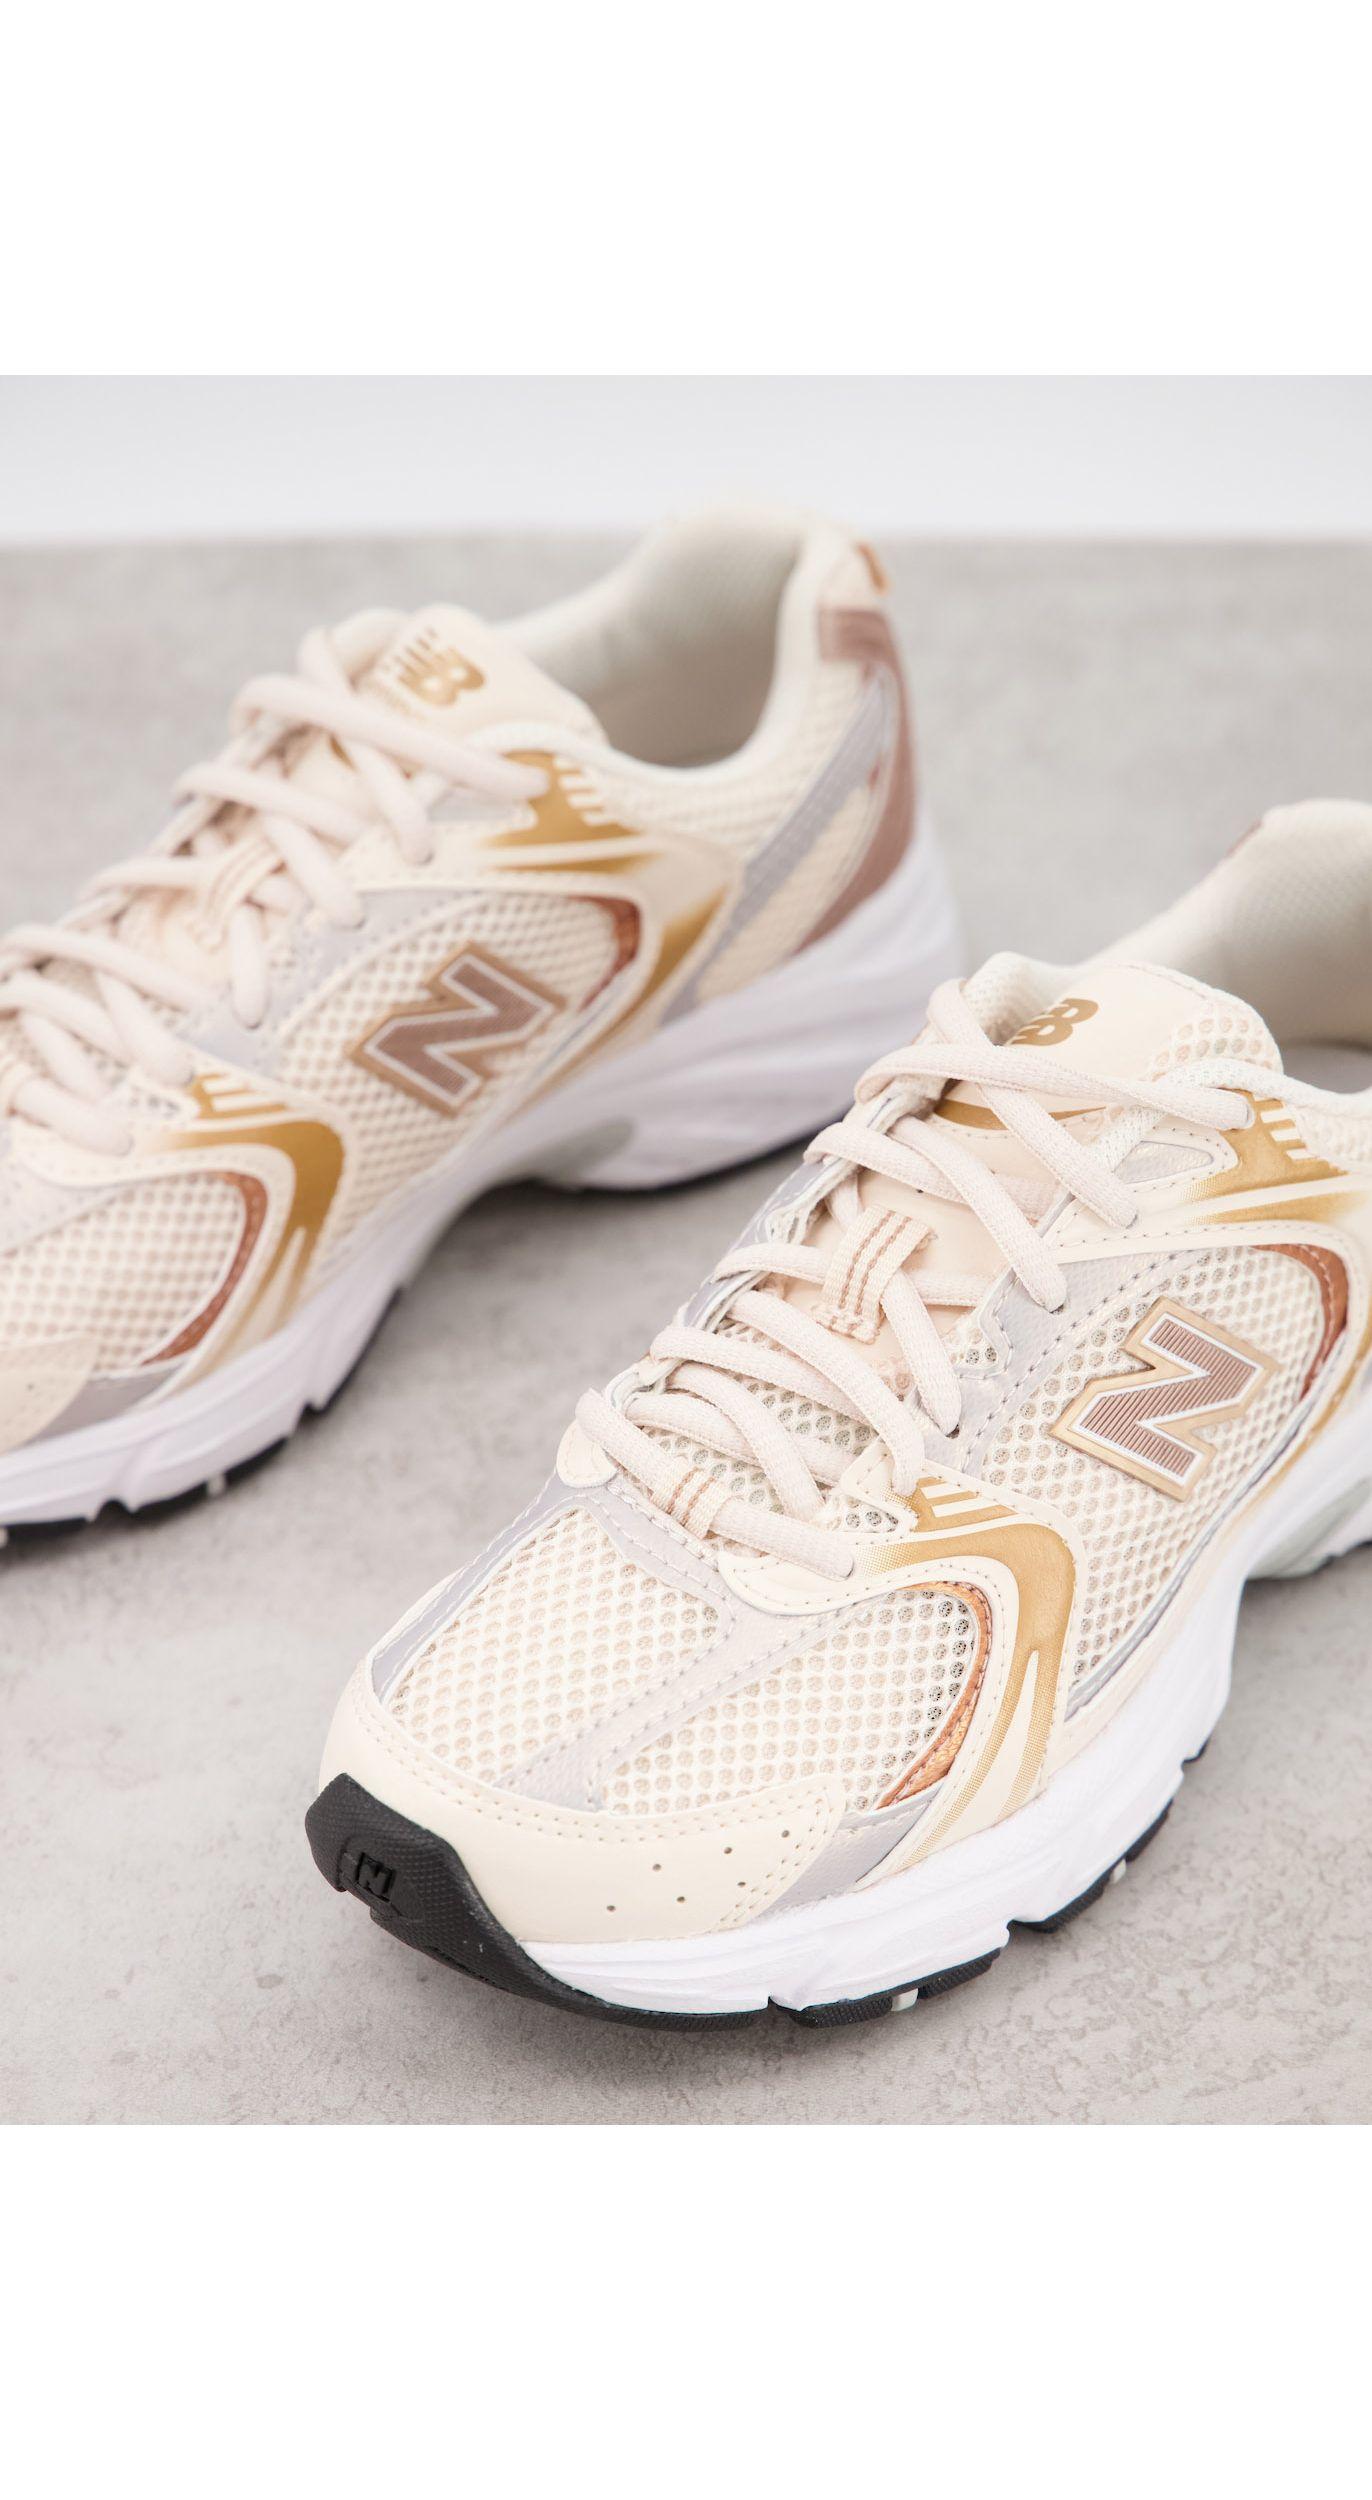 New Balance Rubber 530 Metallic Trainers in Pink | Lyst